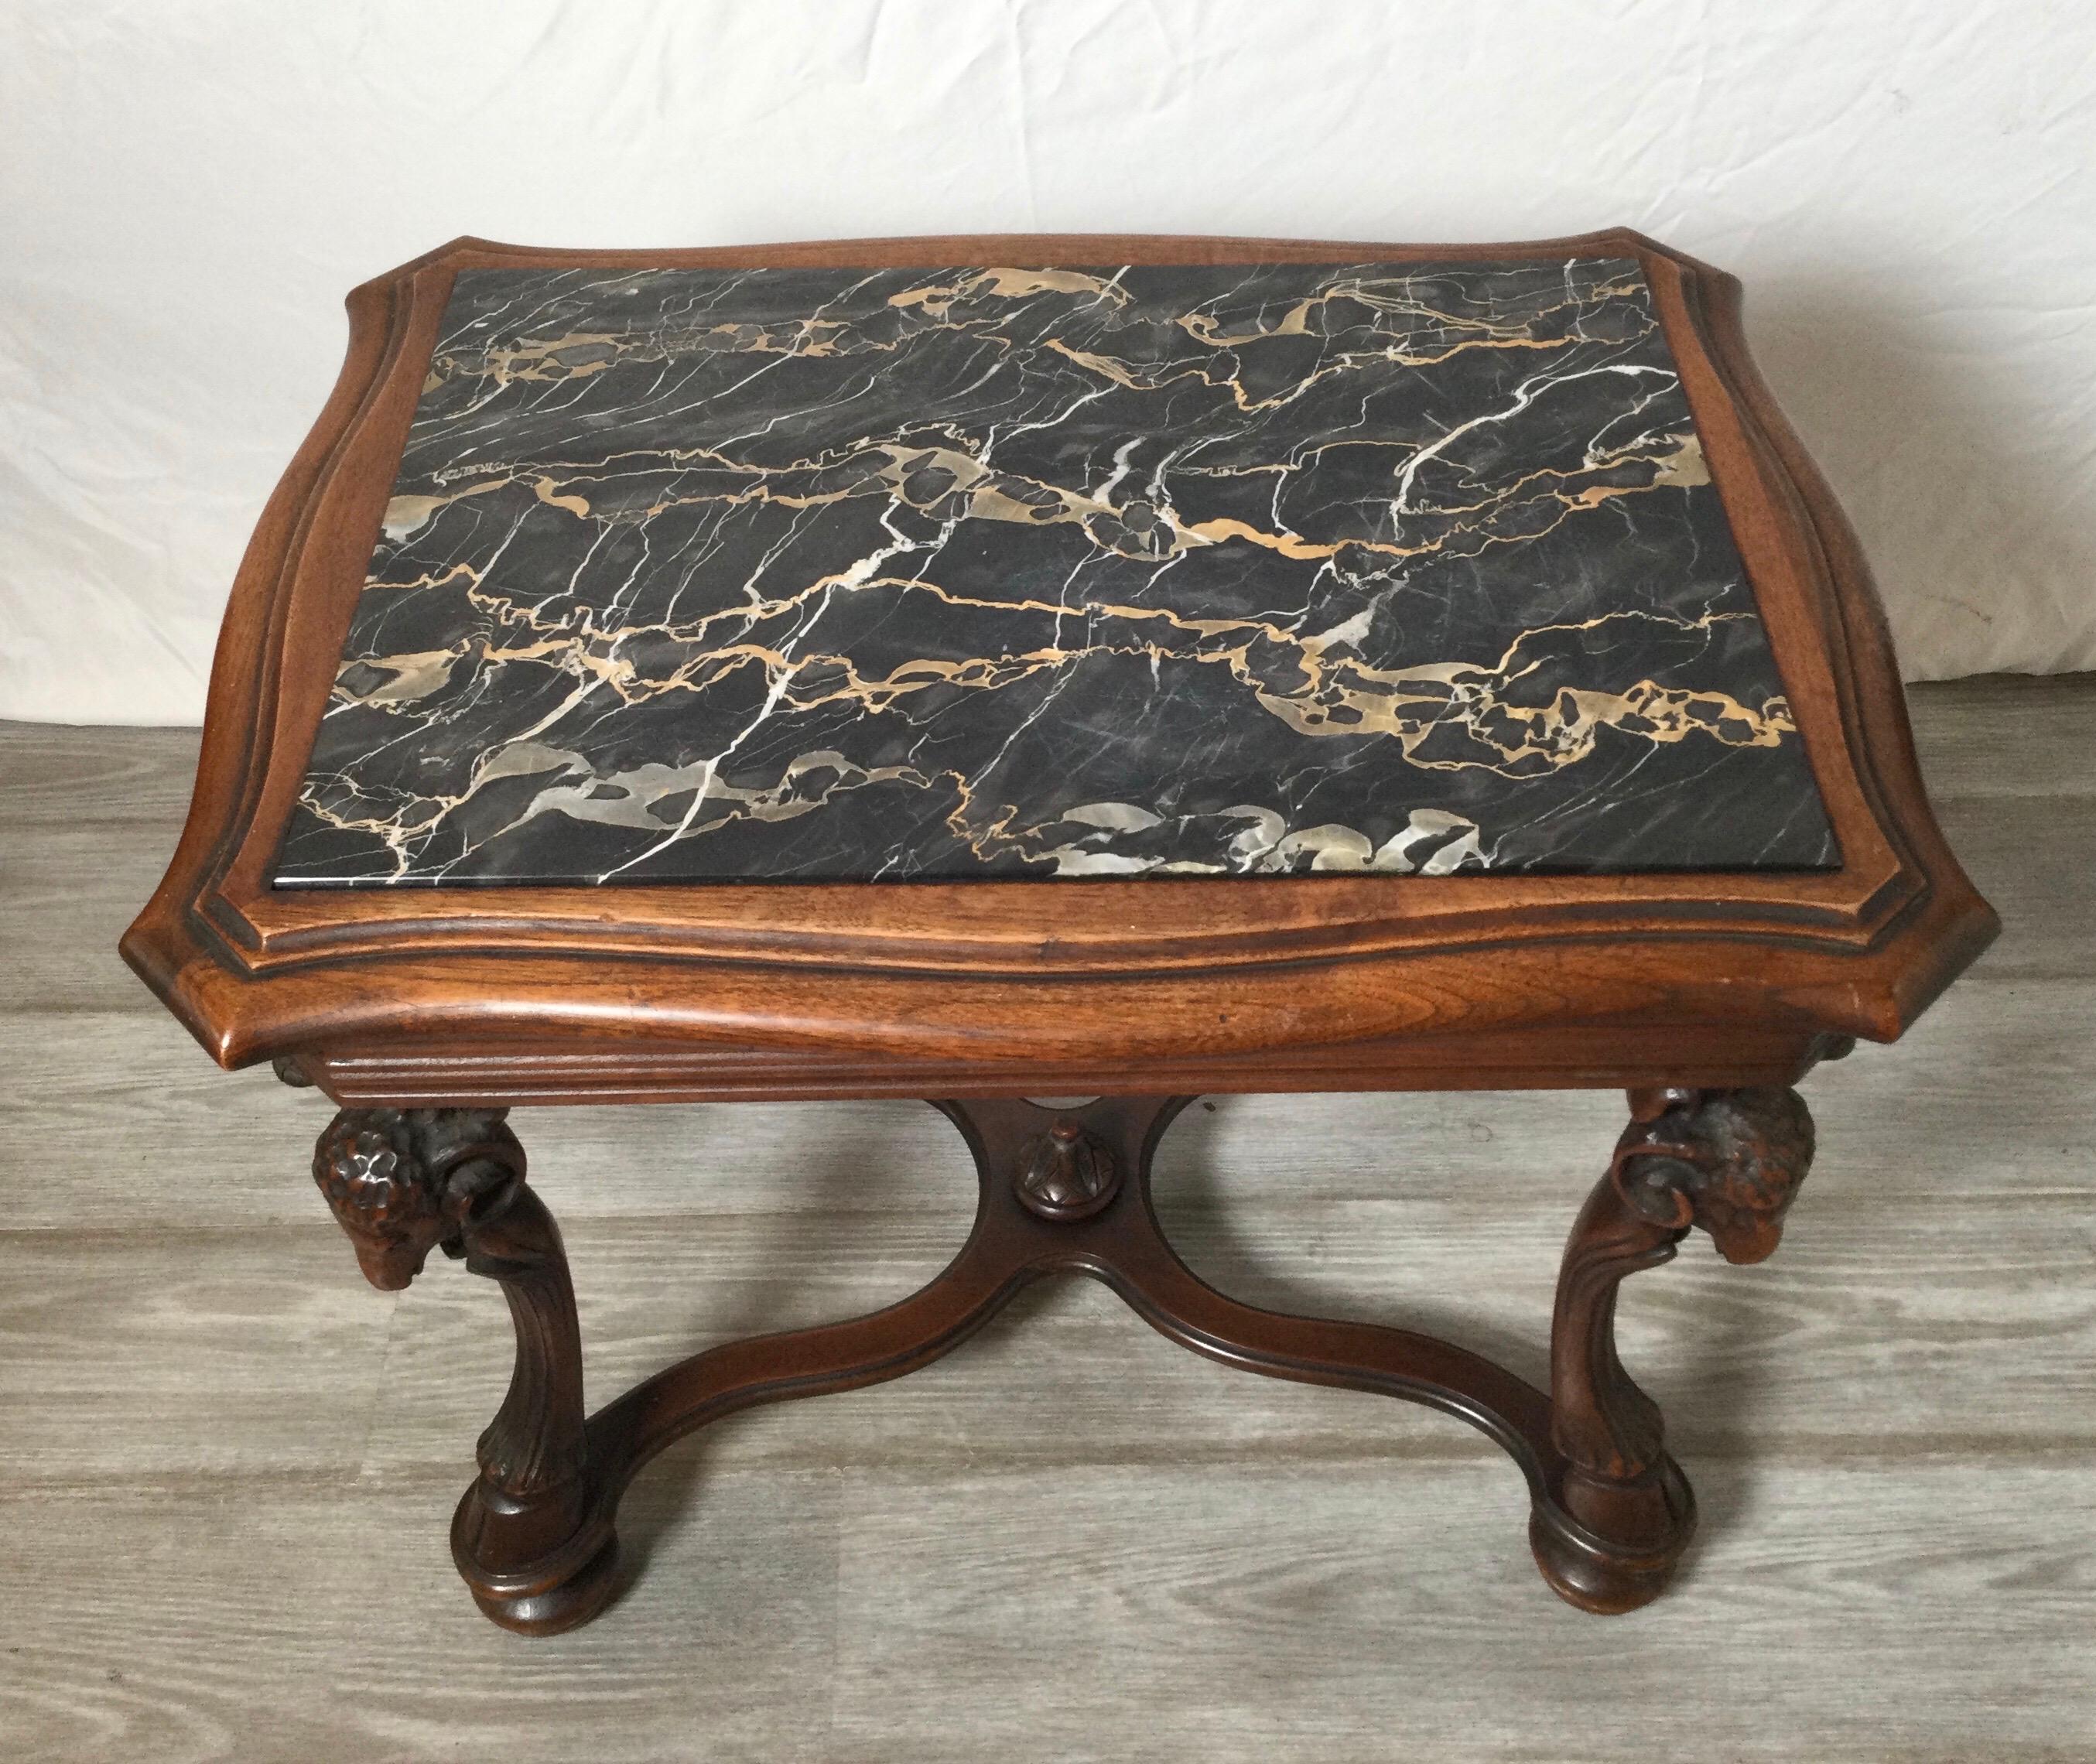 Aesthetic movement hand carved walnut and marble table. The table with beautifully carved ram head and hoof at the feet with a black marble top insert.